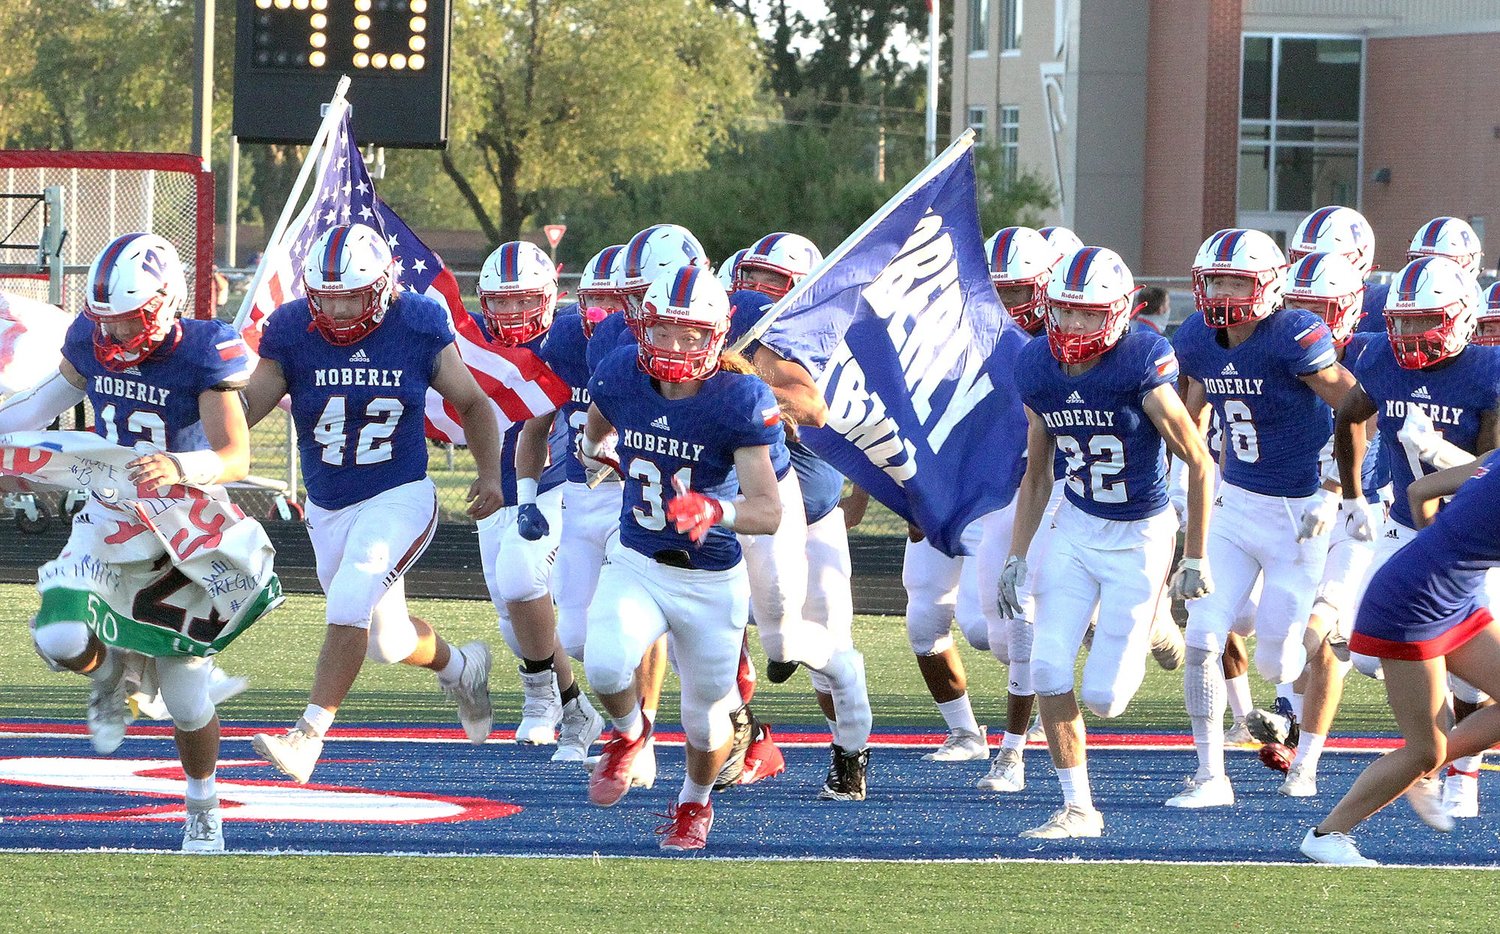 The Class 4 third-ranked Moberly Spartans football team rush to the field at the start of a home game played earlier this 2020 season at Dr. Larry K. Noel Spartan Stadium. Christian High School of O'Fallon canceled its scheduled matchup Friday, Oct. 23 due to COVID-related concerns. As a result, Moberly may end up not playing games for the next two weeks leading up to their scheduled Nov. 6 district contest.